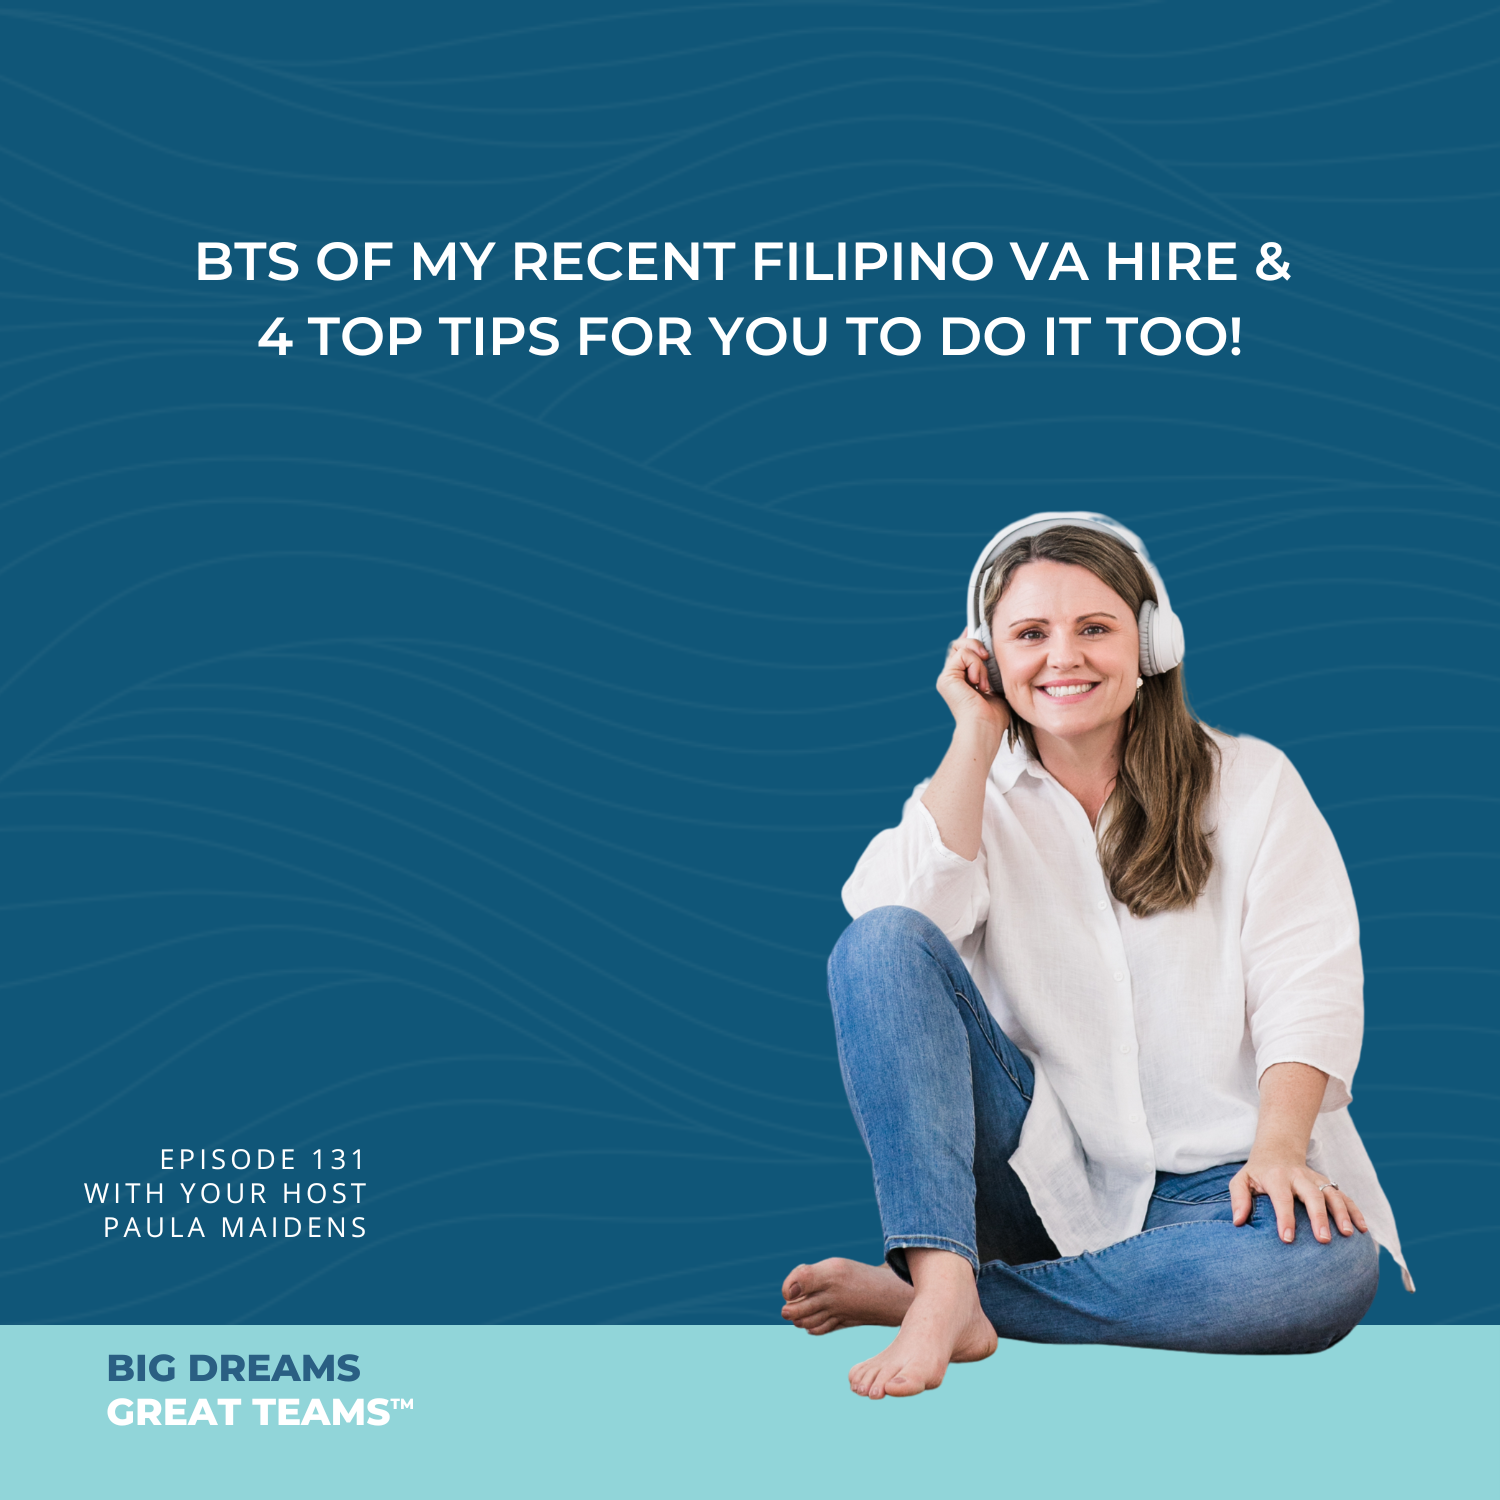 Episode #131 - BTS of My Recent Filipino VA Hire & 4 Top Tips for You To Do It Too!